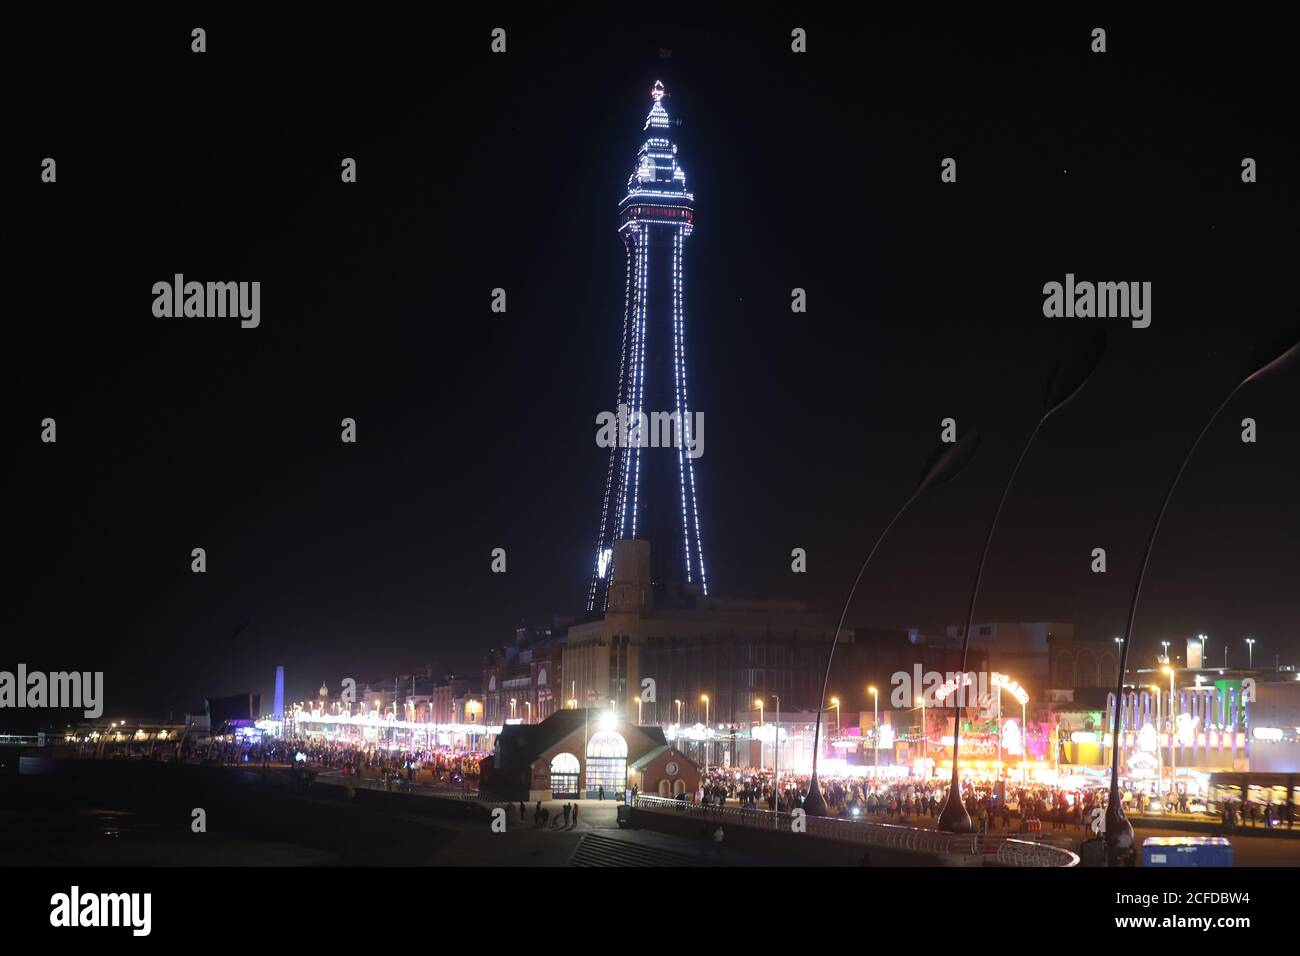 Blackpool Tower lit up on the first day of the annual lights display in the north west England seaside resort. This year the lights will remain on display until January, two months longer than normal, to help boost the tourism trade which has been hit by the Covid-19 pandemic. Stock Photo